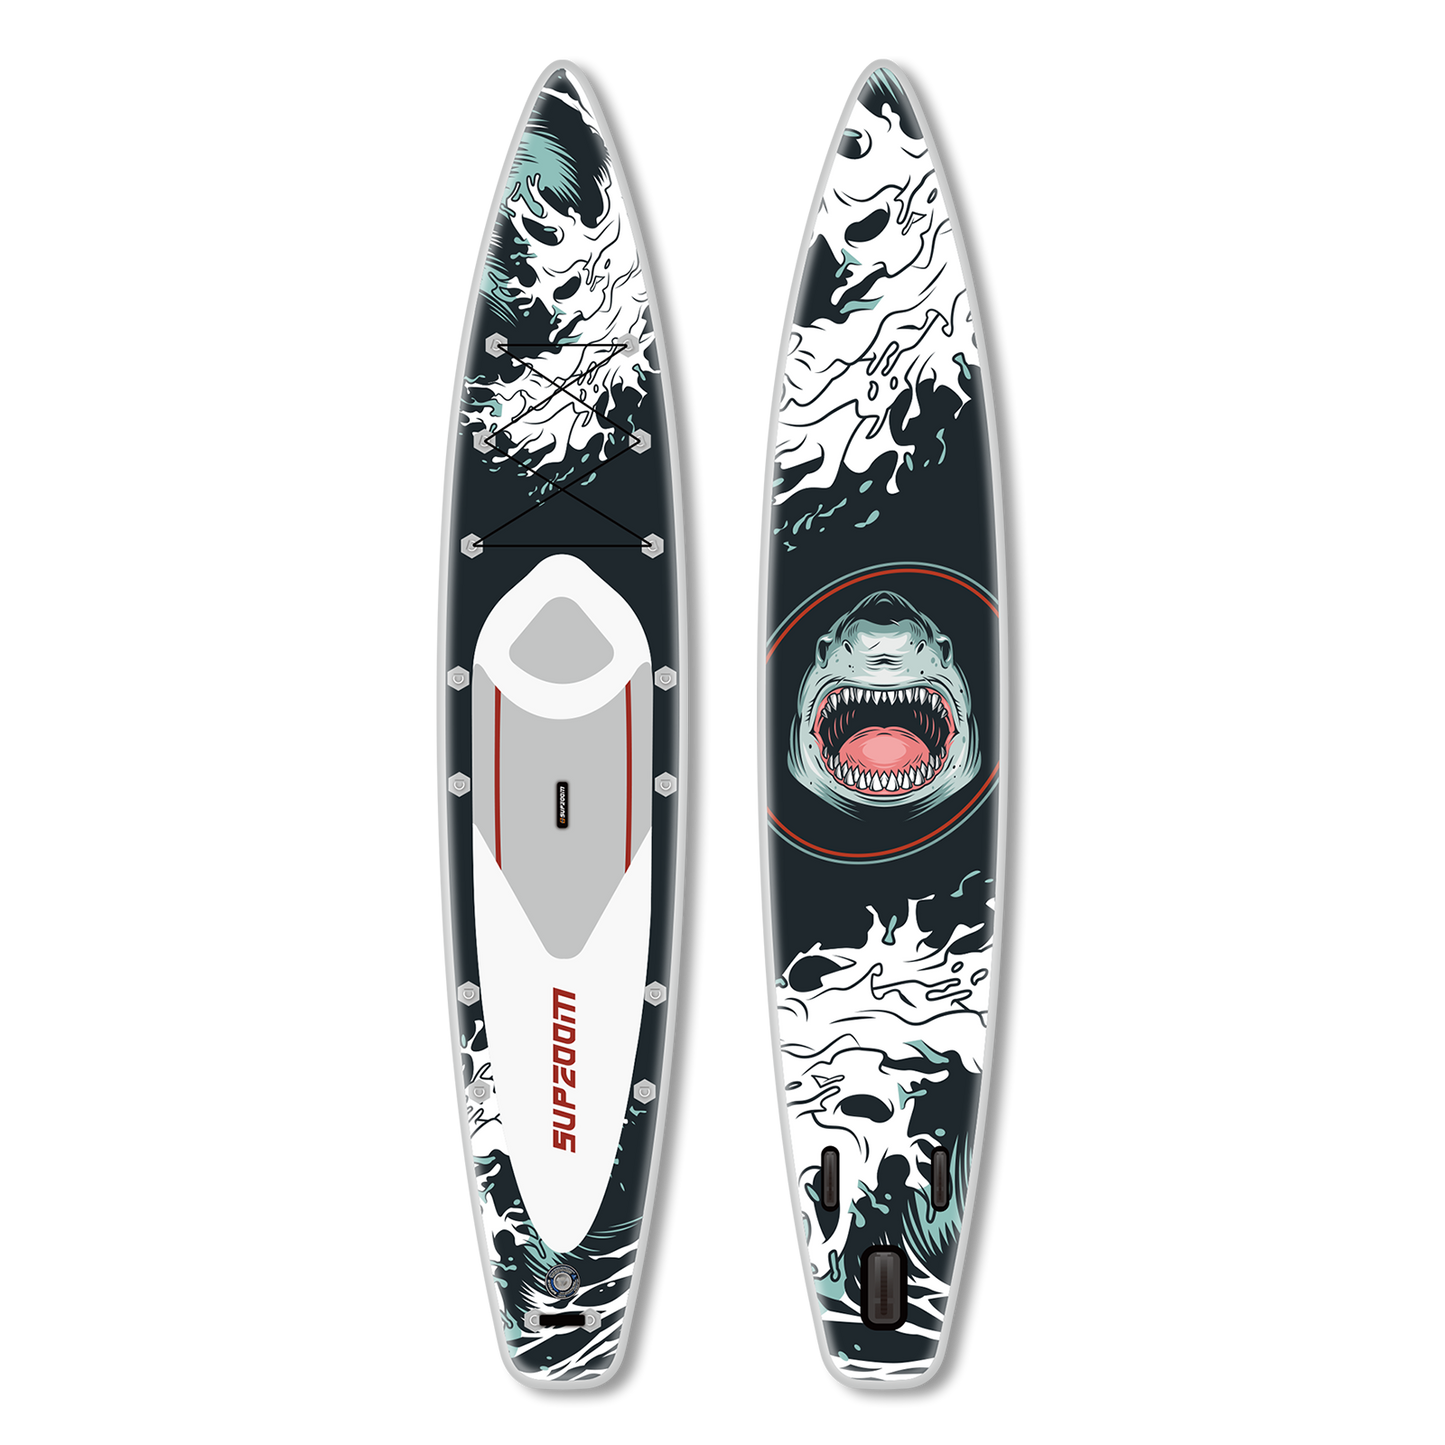 Touring 14' shark style inflatable paddle board | Supzoom